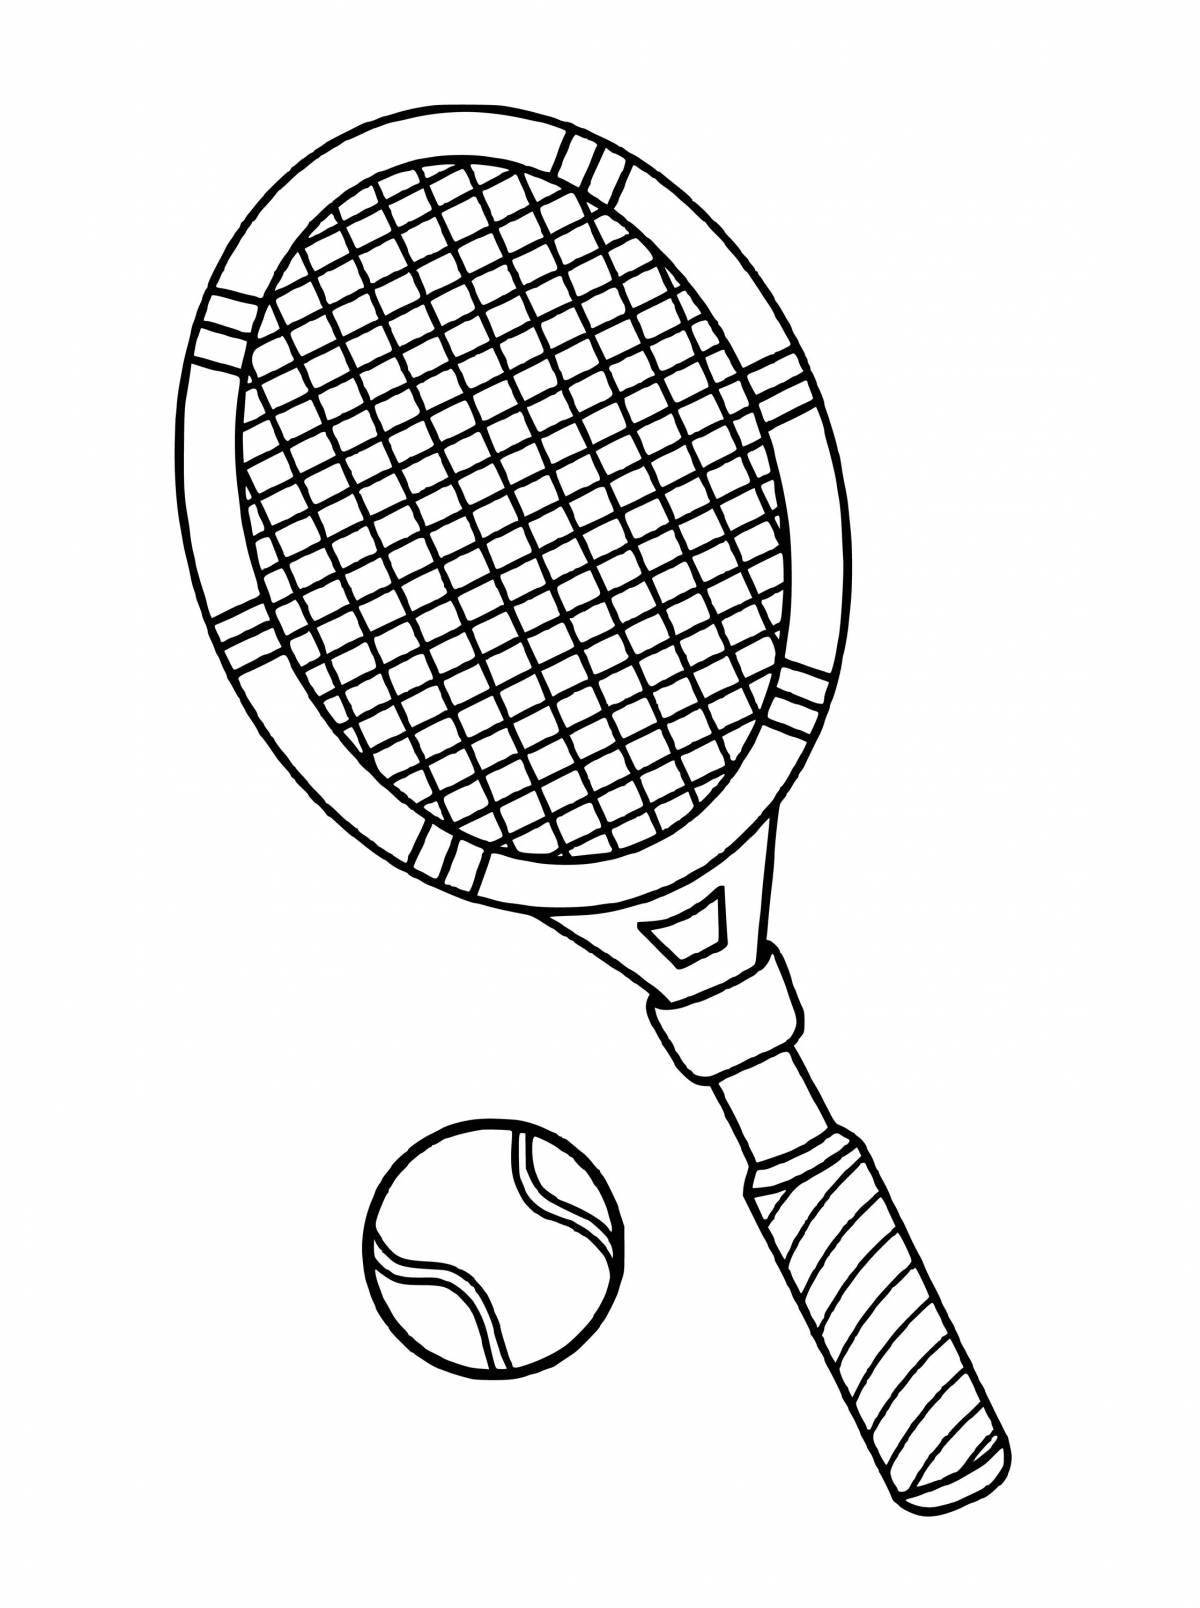 Mysterious tennis racket coloring page